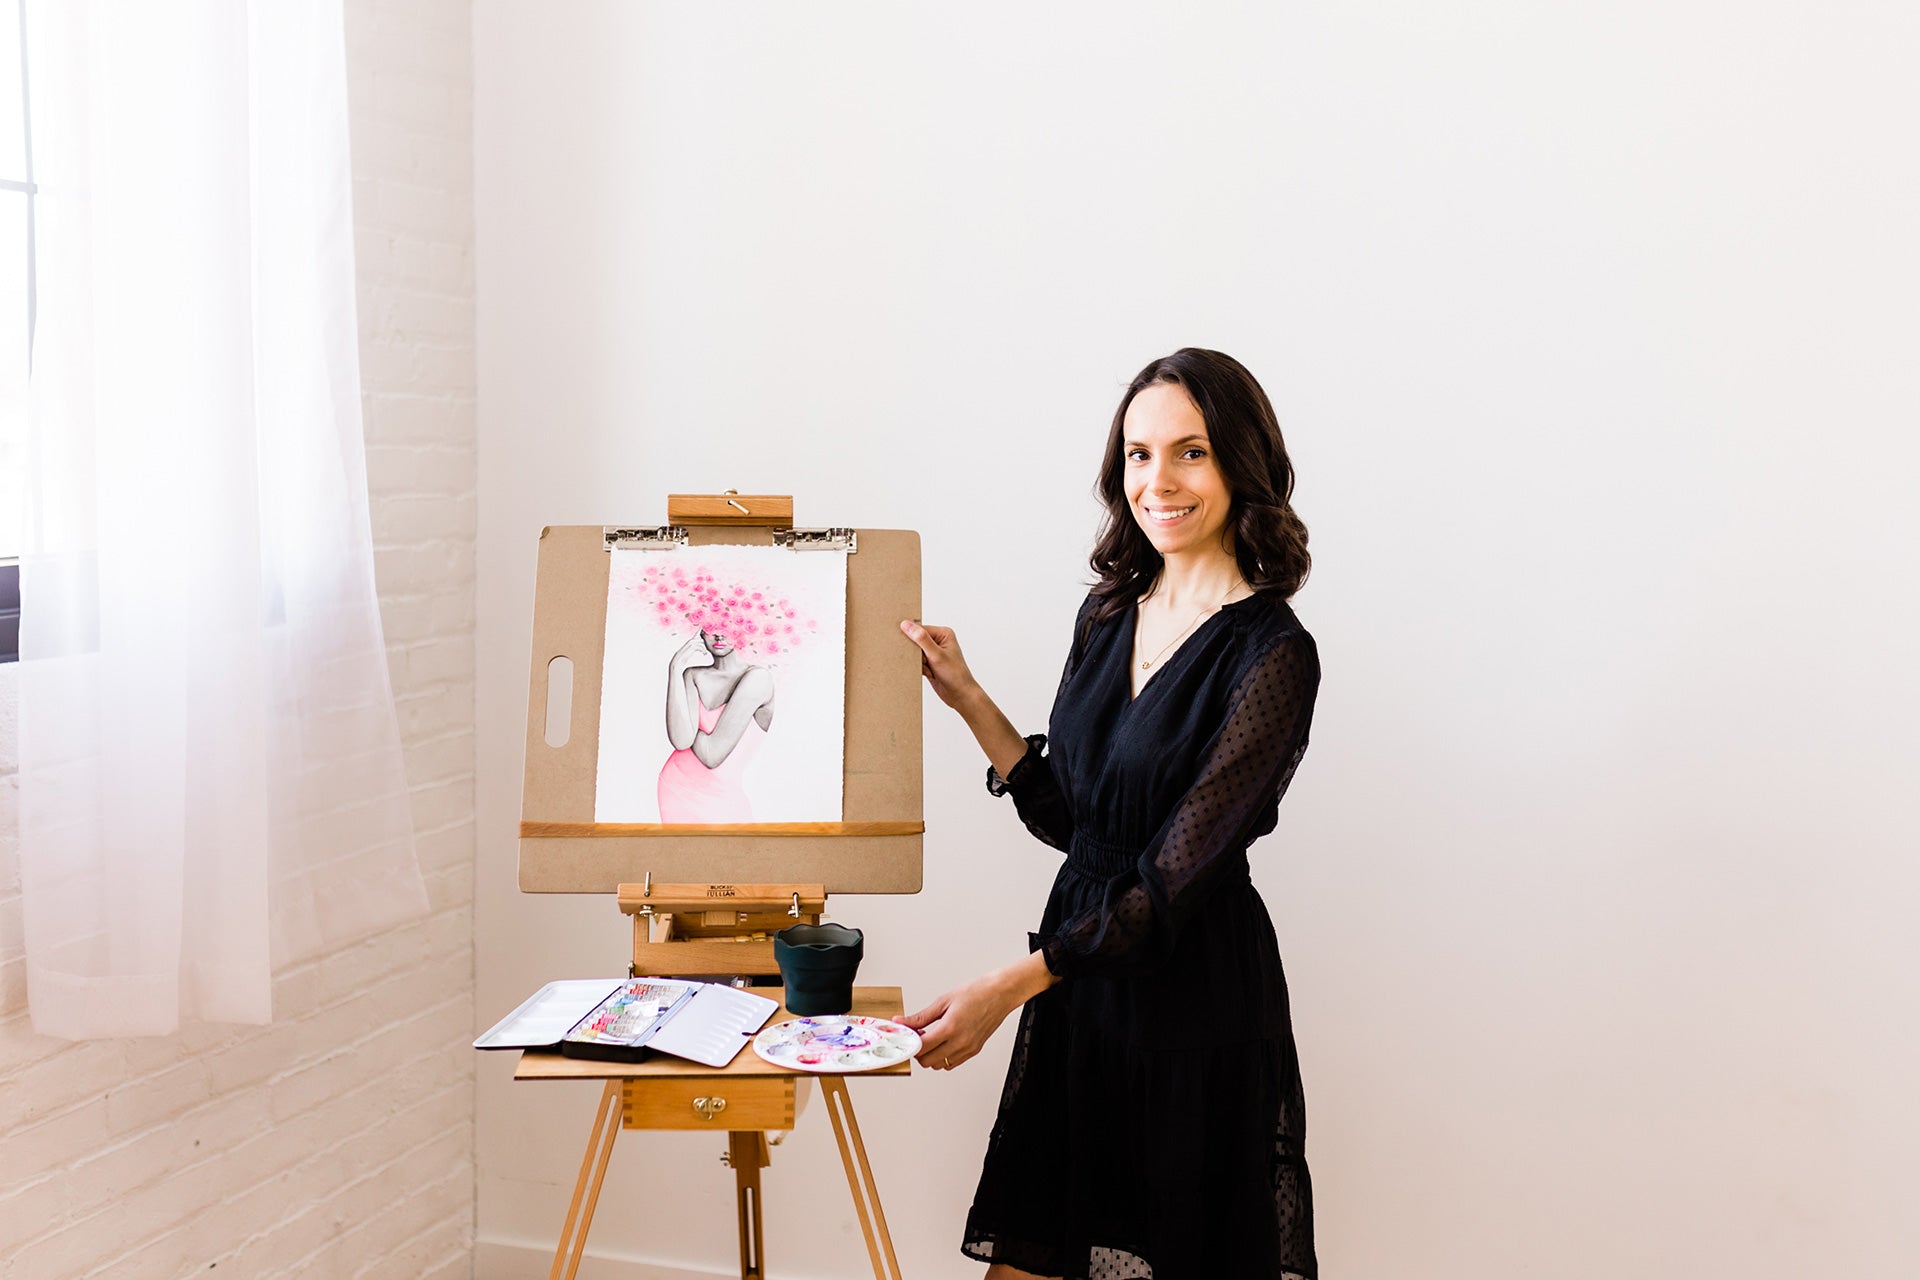 Watercolor artist Maria Ahrens posing with painting on easel